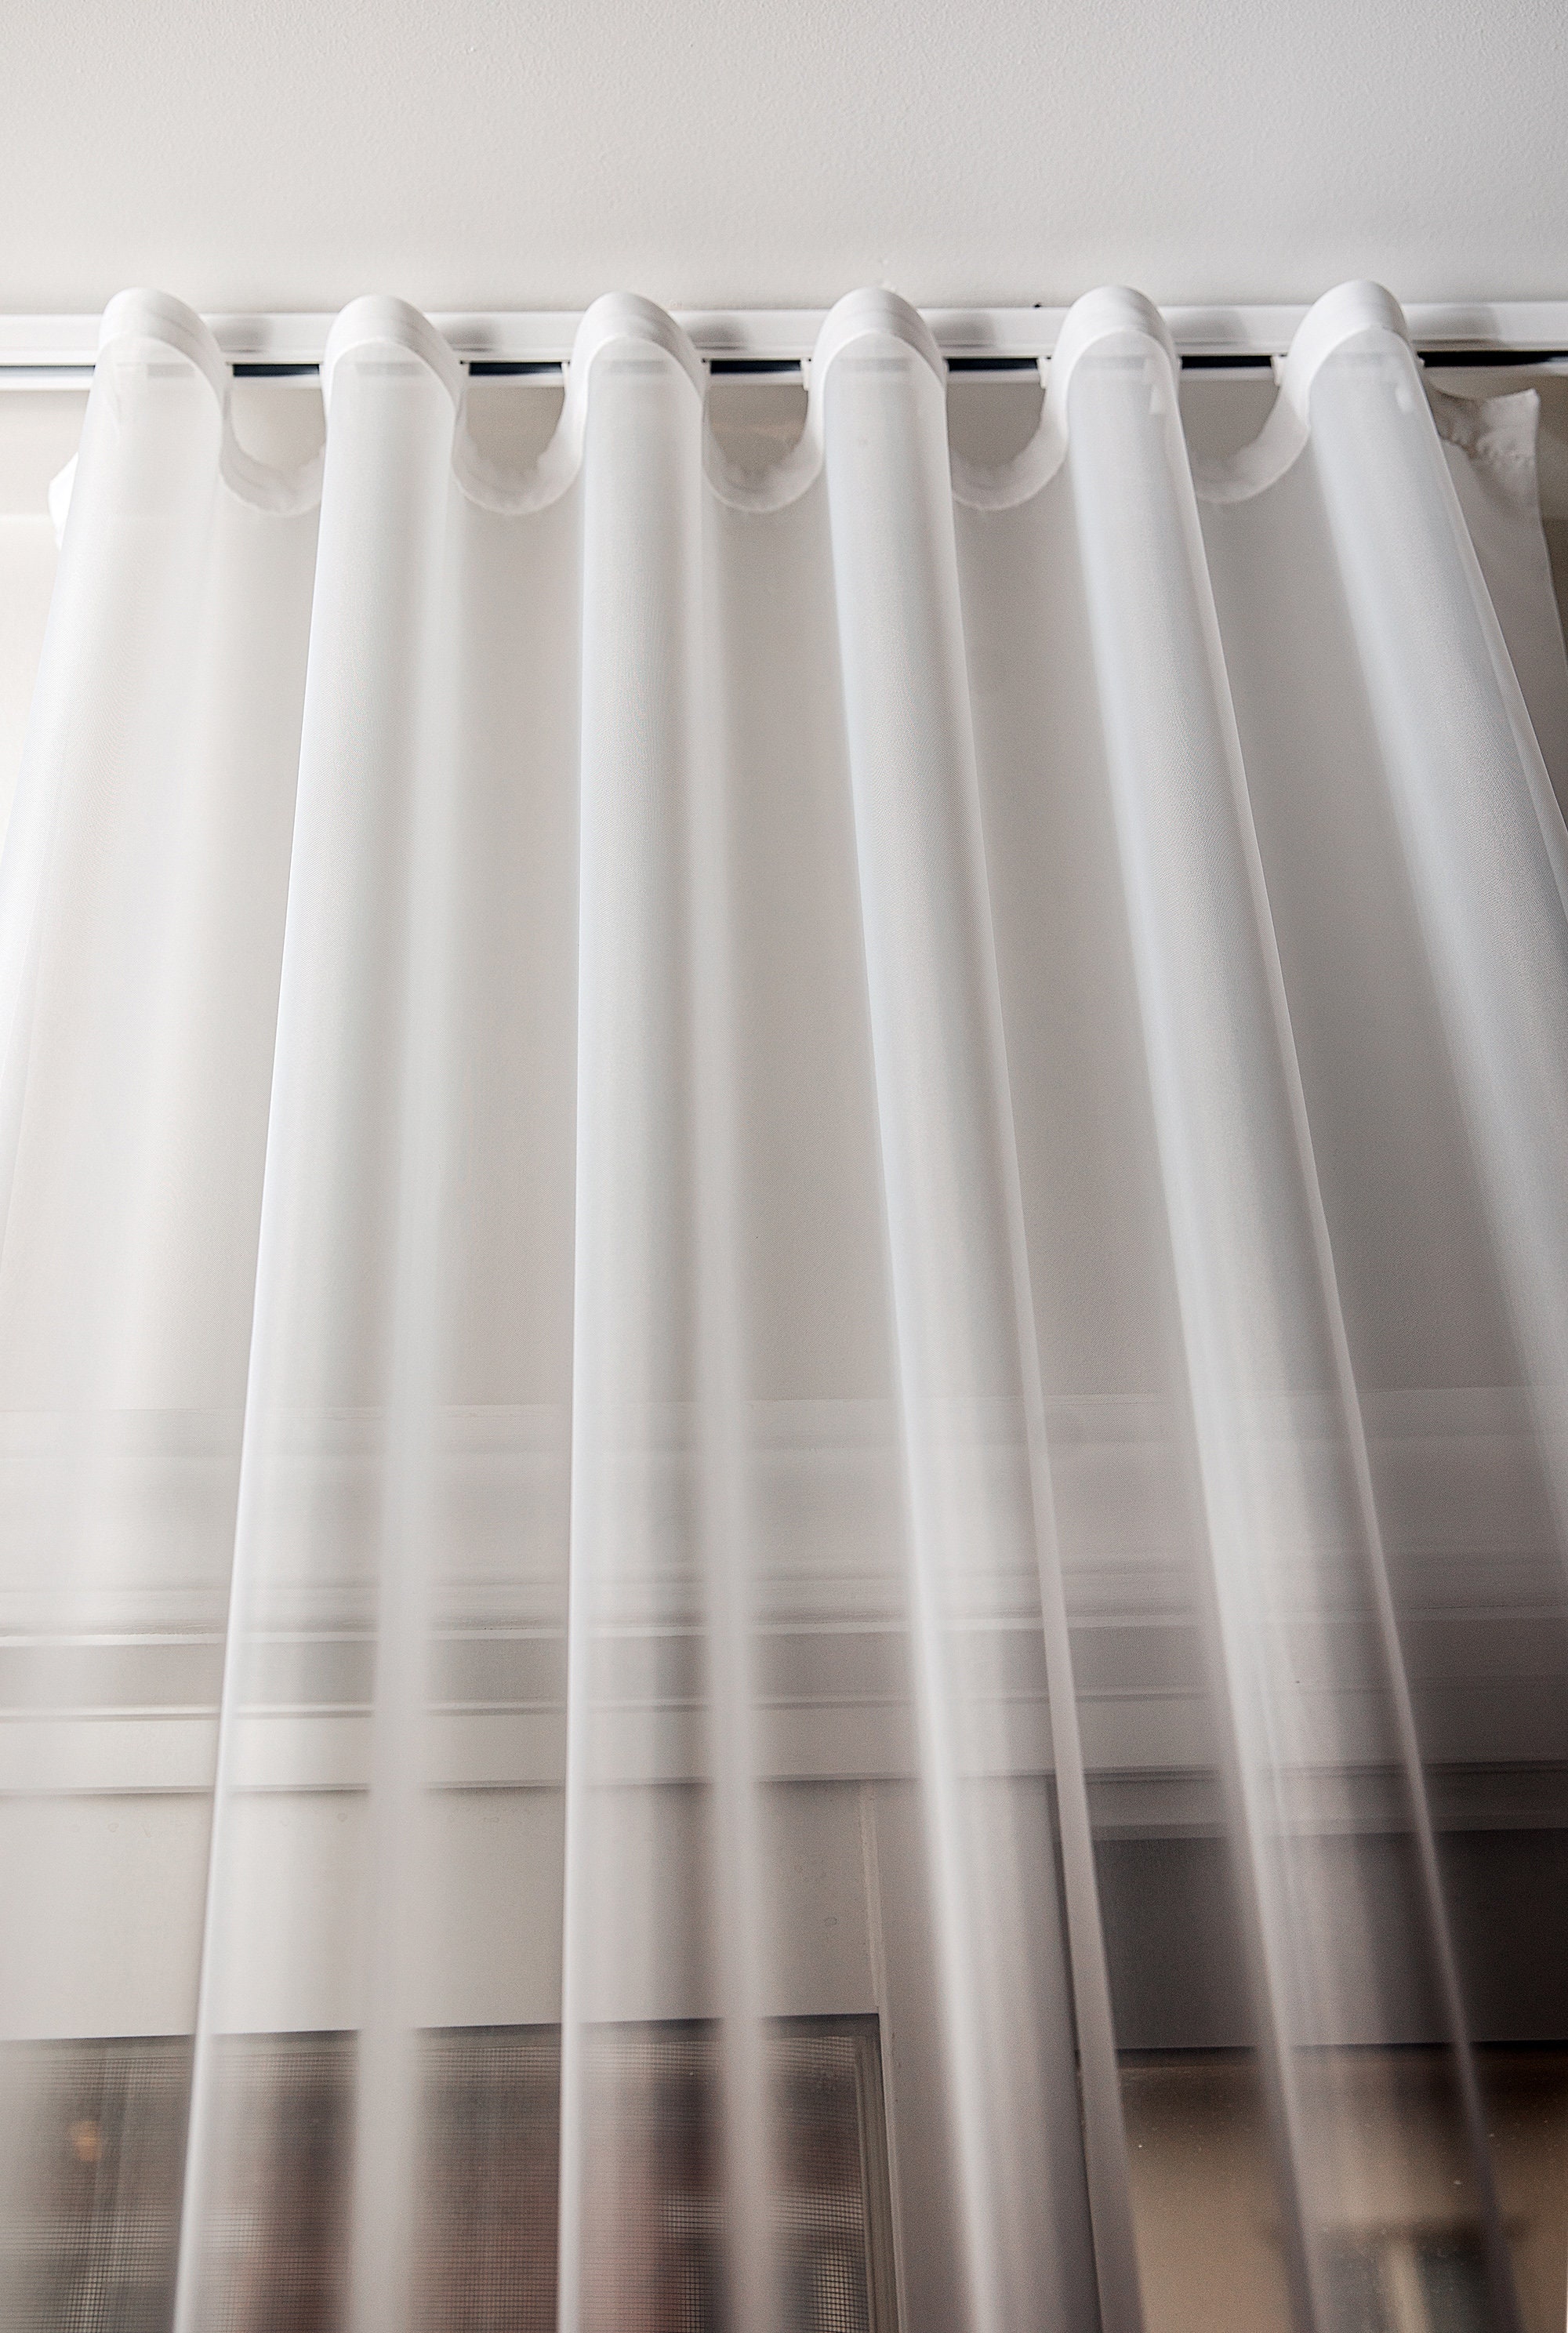 HAND MADE HIGH QUALITY VOILE NET CURTAINS FOR YOU 9 COLOURS AVAILABLE 7 LENGTHS 